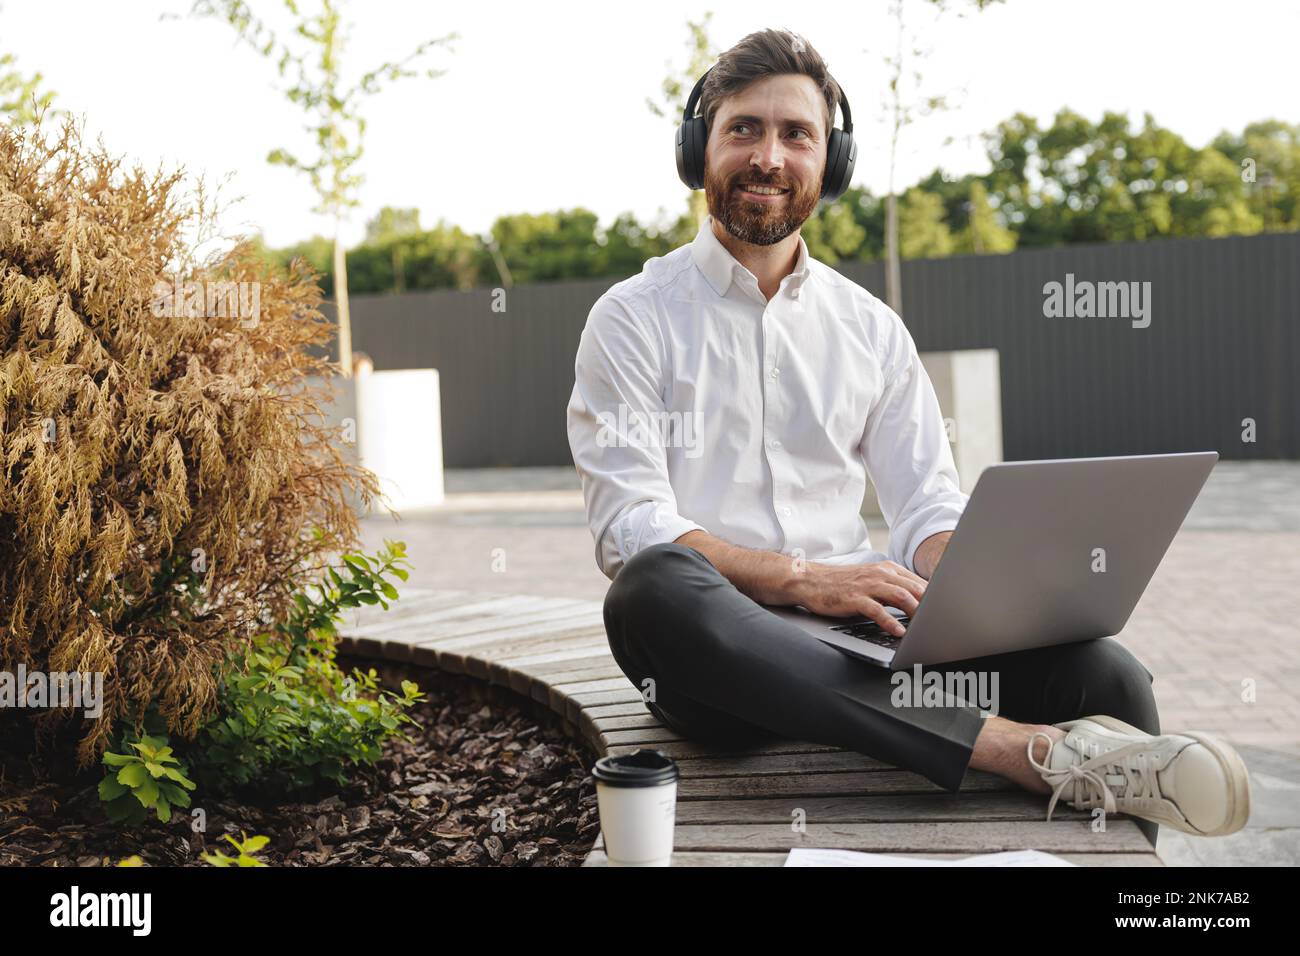 Joyful freelancer sitting on wooden bench with portable laptop on knees. Handsome man in black headphones looking aside with smile on face while worki Stock Photo